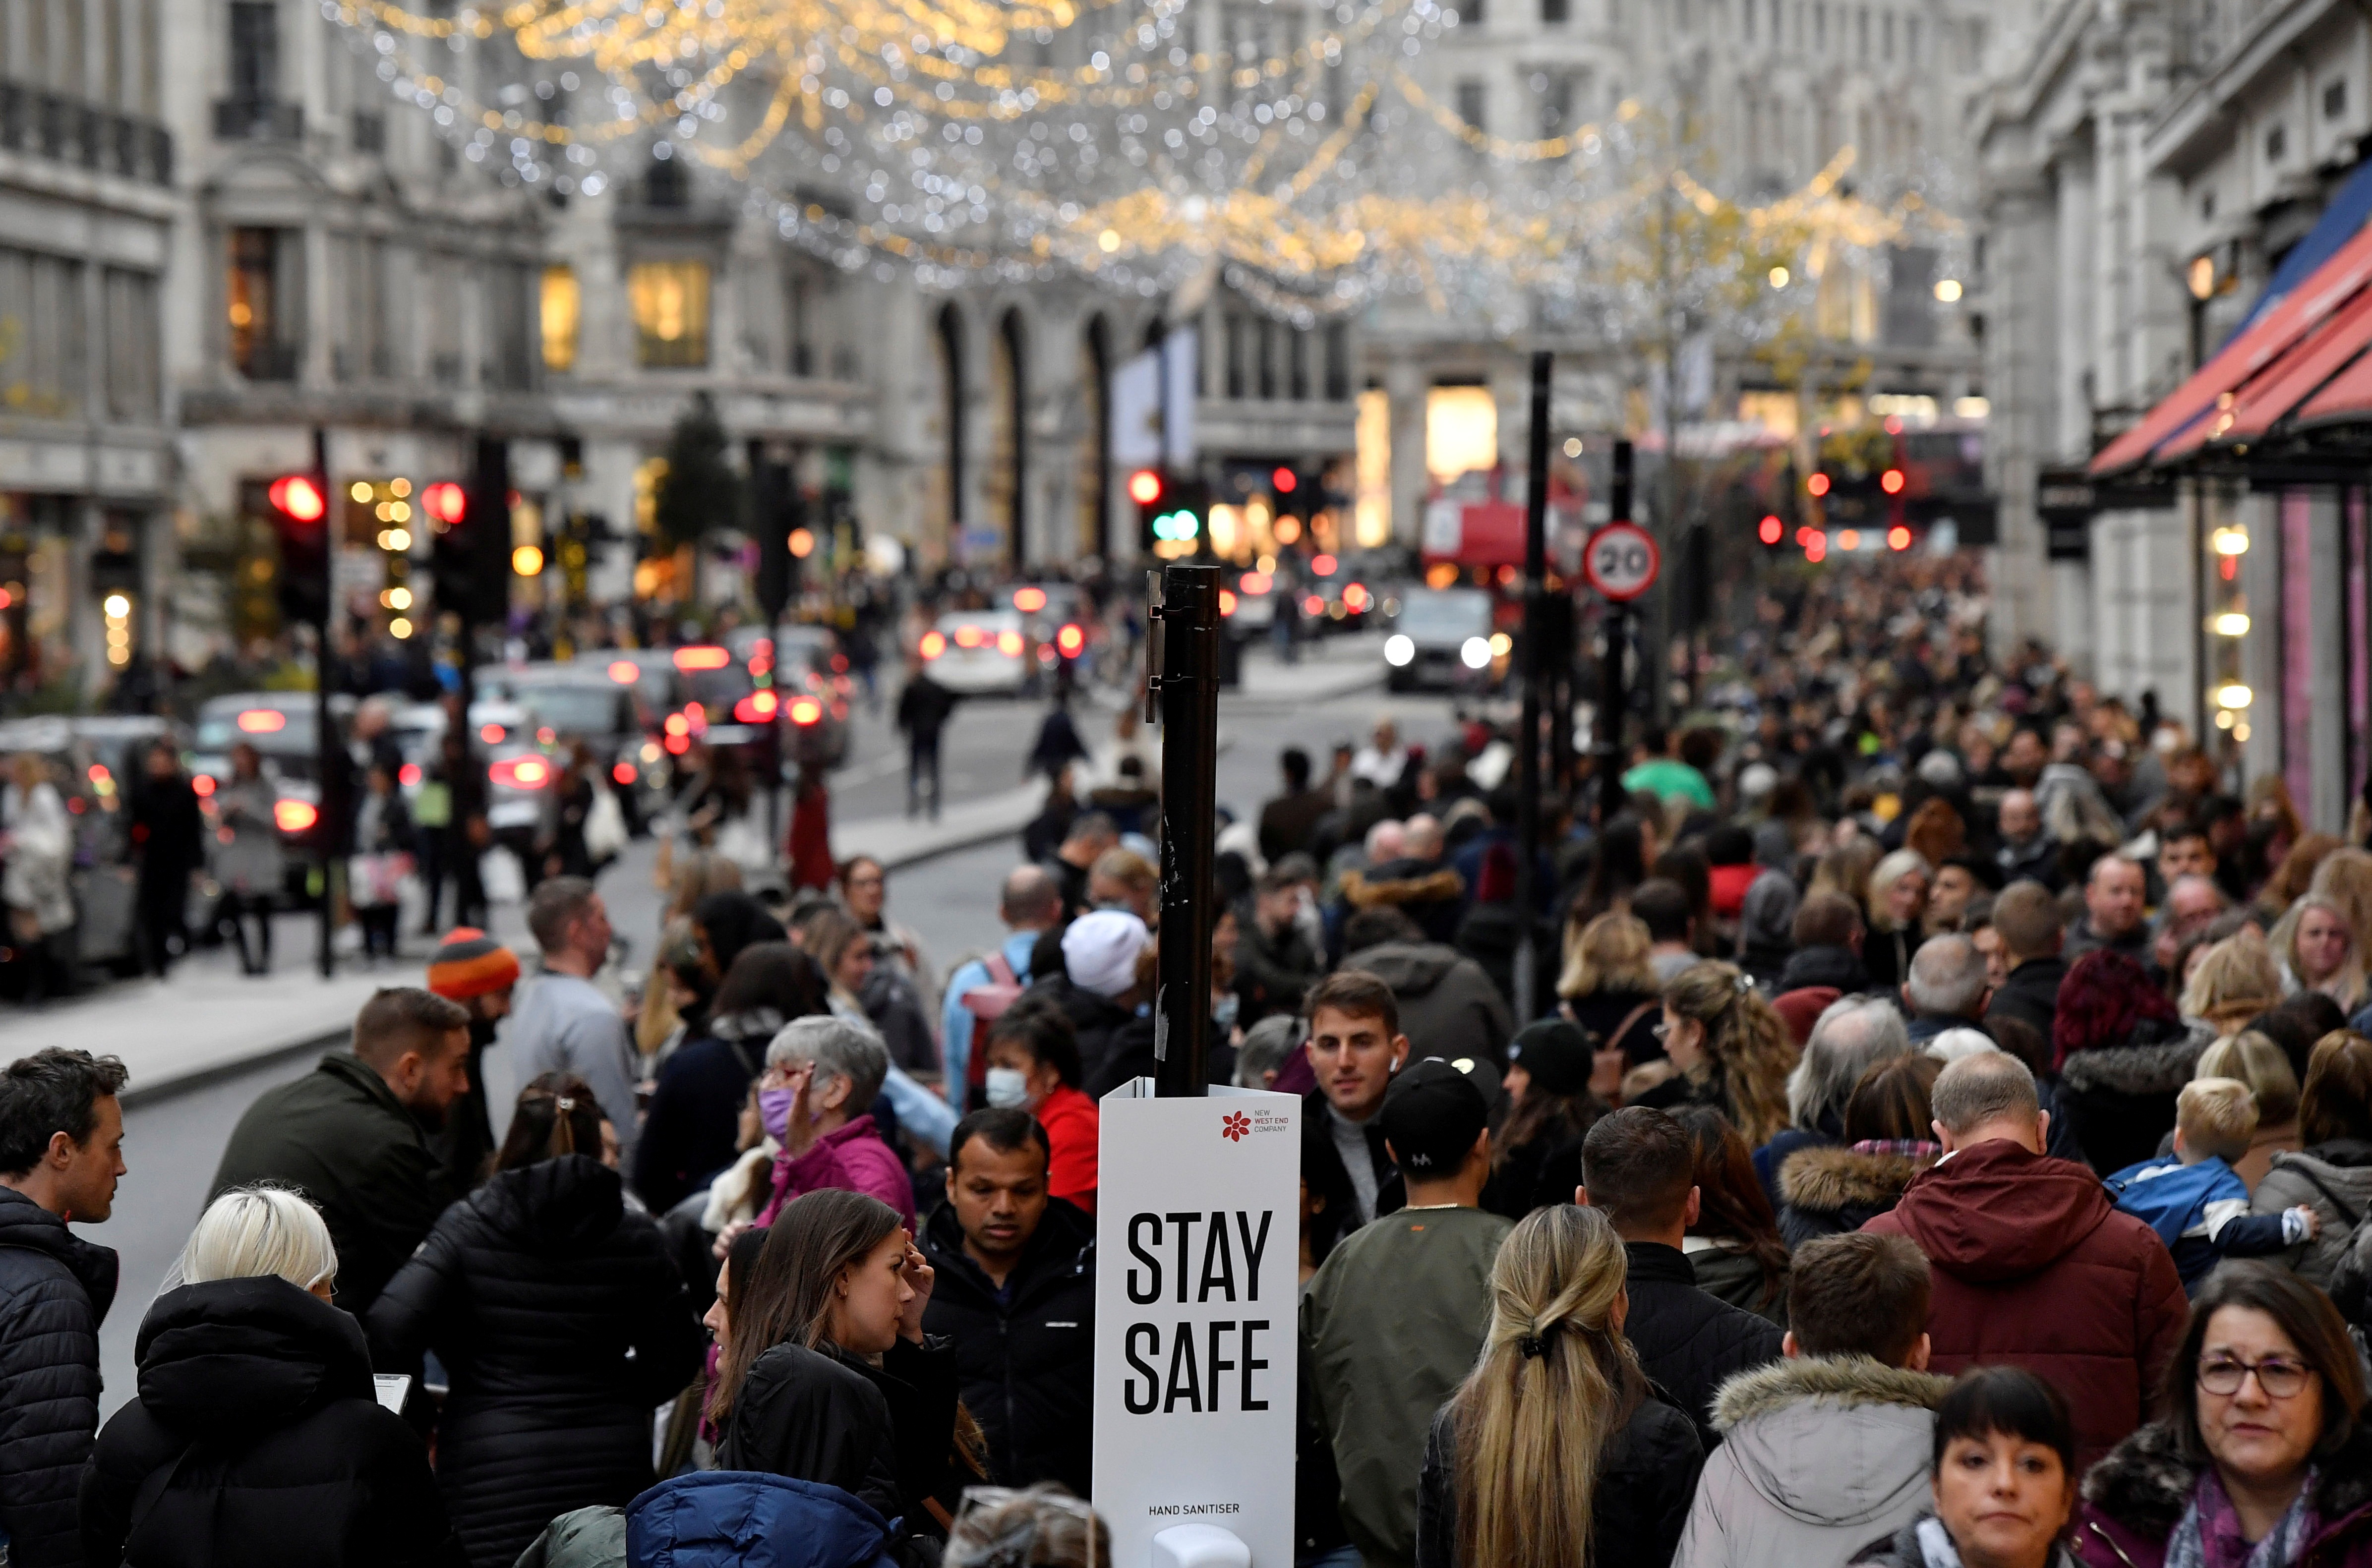 Shoppers walk past a message on a hand sanitiser station amid the spread of the coronavirus disease (COVID-19) pandemic, in Regent Street, London